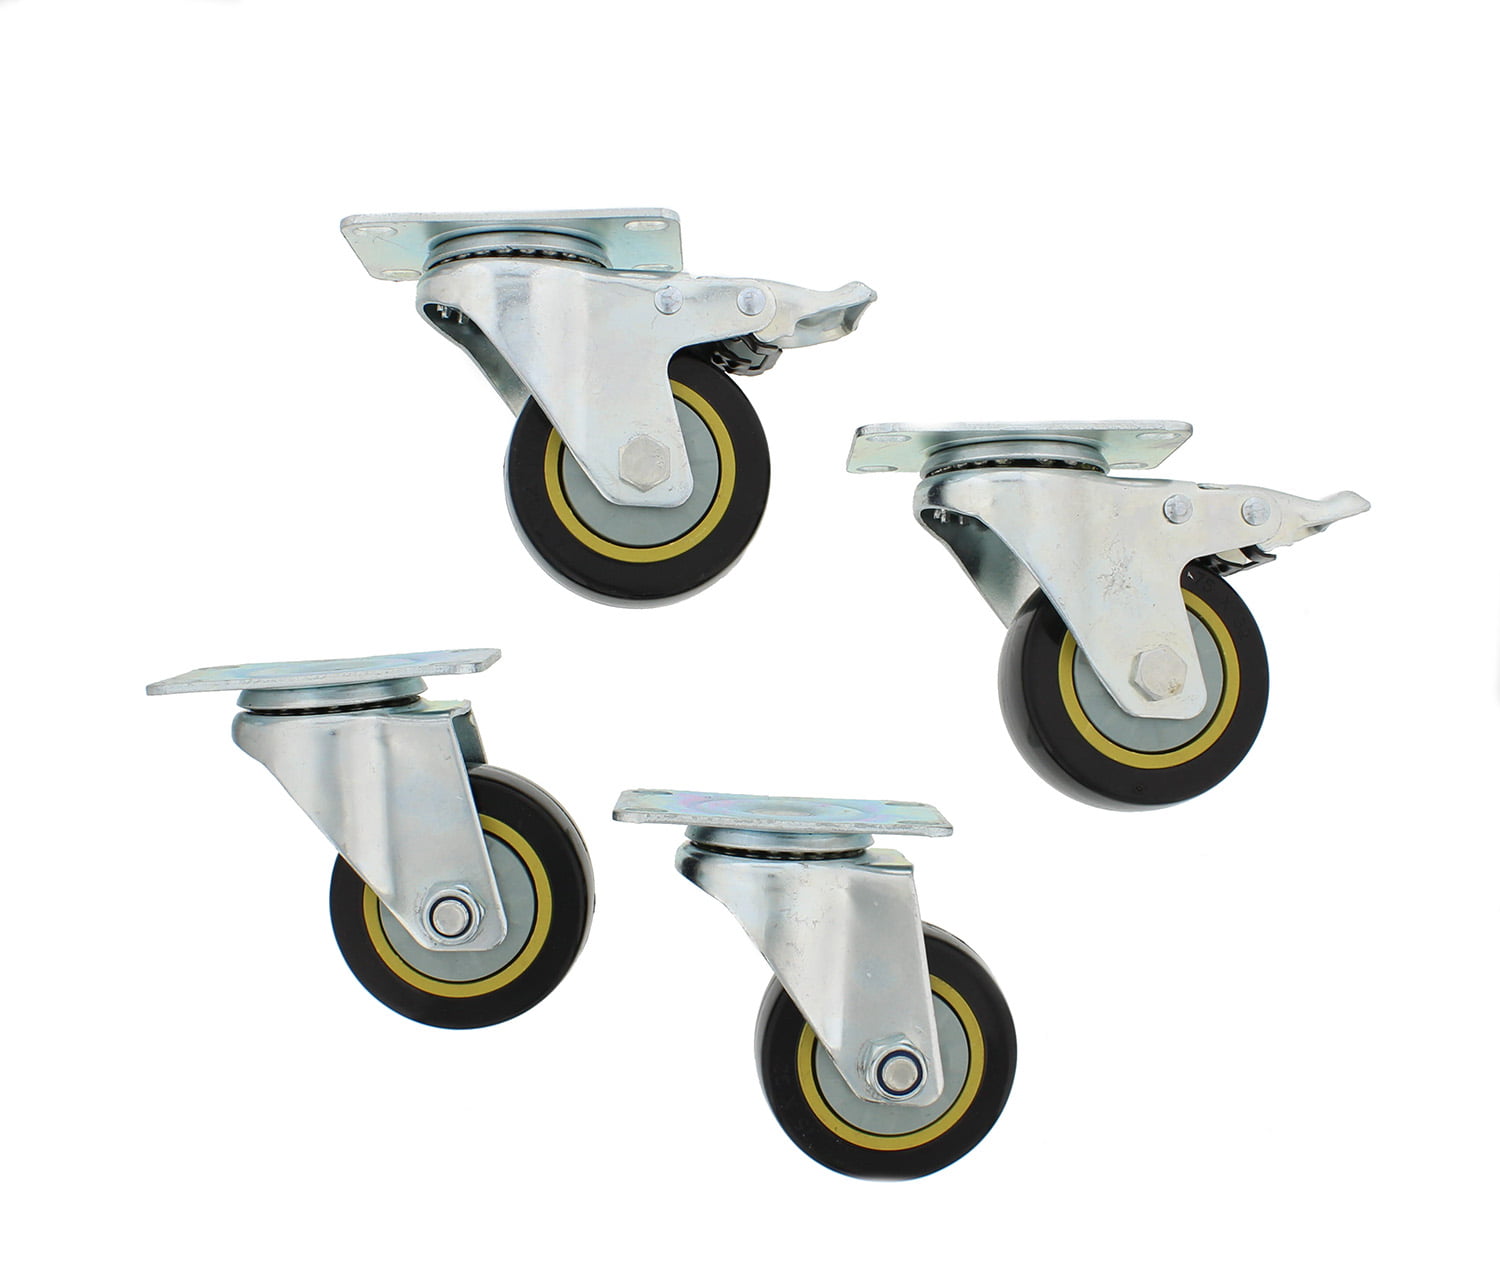 ABN Swivel Plate Caster Wheels 3” Inches Set of 4 Locking Casters for Furniture 